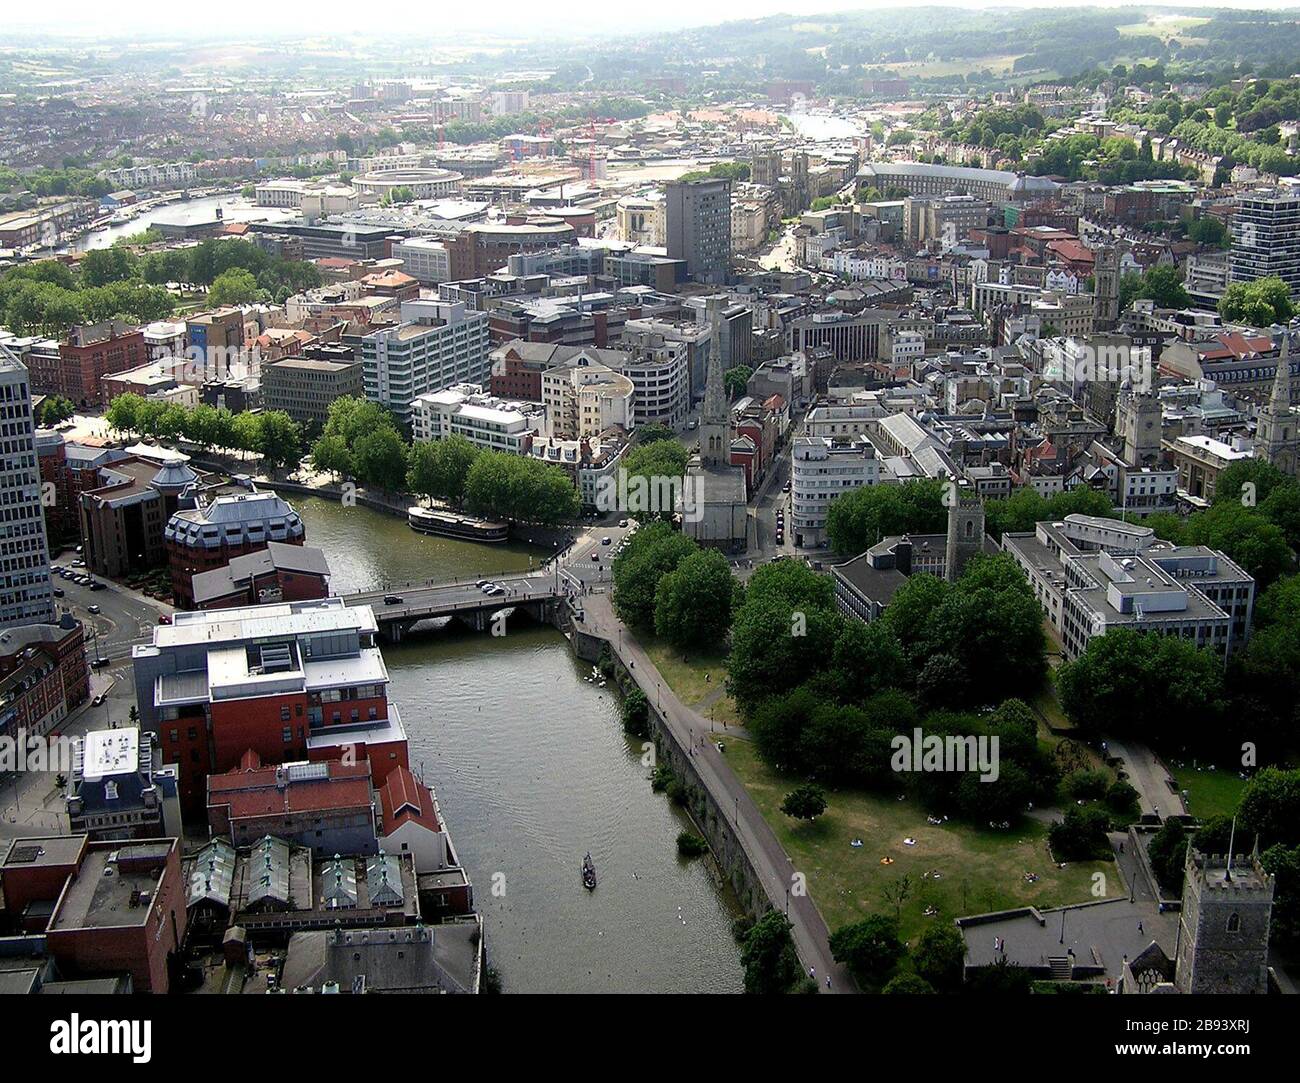 'The River Avon flows through the centre of Bristol, England. Portions of the true river can also be seen top left, and towards the top of the picture at centre right Centre left is Bristol Bridge, with four cars on it. In the bottom left corner are the red-tiled roofs of the former Georges Brewery, bordering the river. The buildings are now flats. Bottom right is the greenery  of Castle Park with people sunbathing. The hills at top right include Ashton Park where the Bristol Balloon Fiesta is held. The picture was taken from a tethered passenger balloon, 500 feet up.; 16 July 2005; Photograph Stock Photo